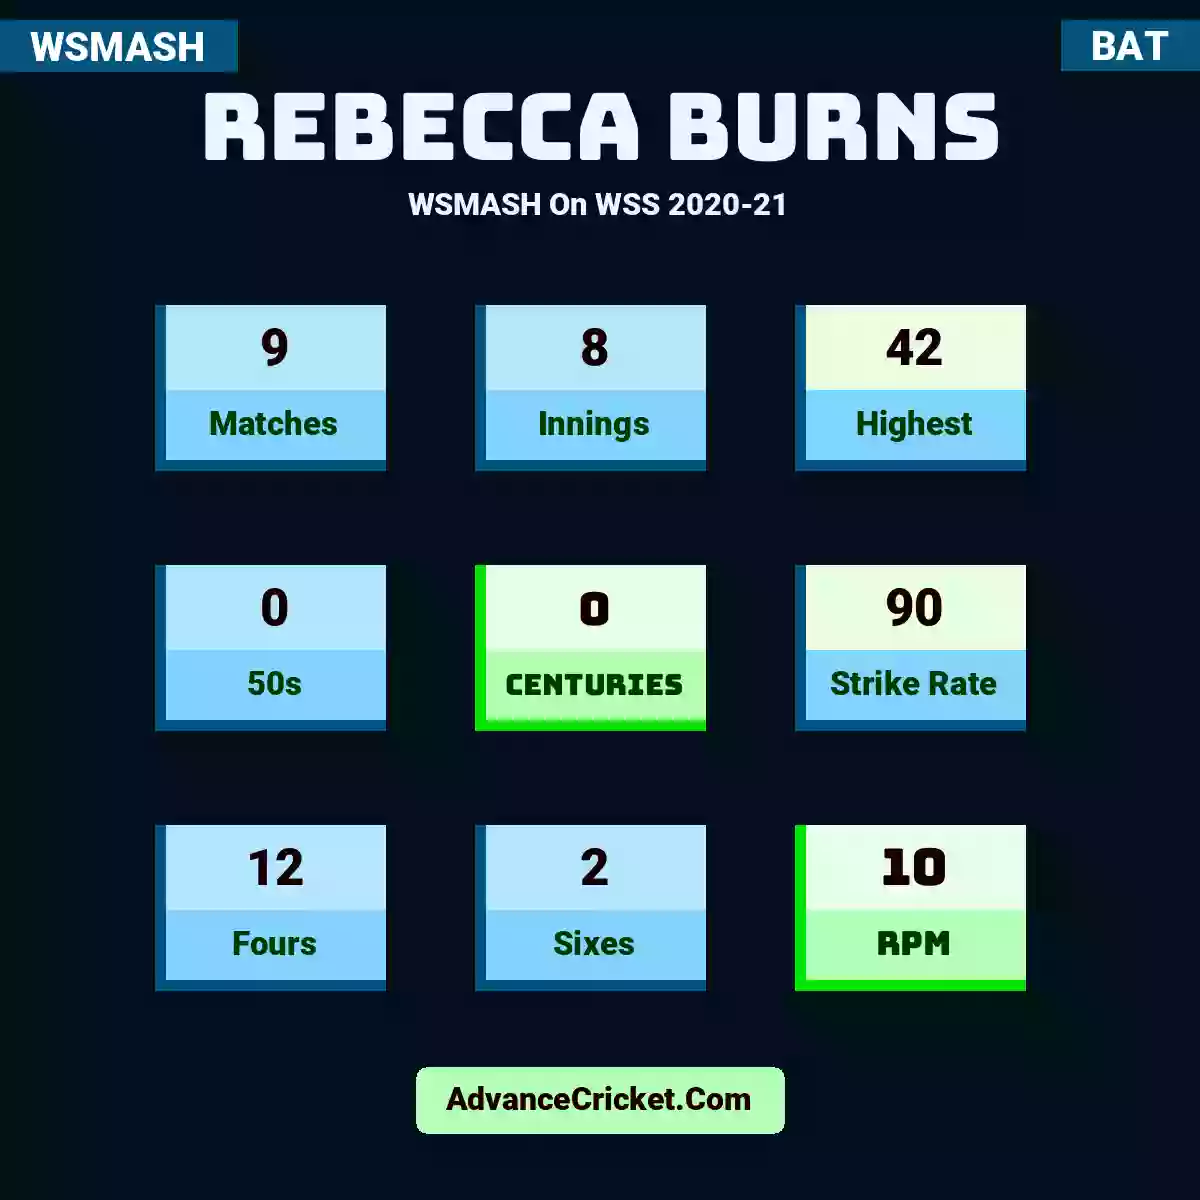 Rebecca Burns WSMASH  On WSS 2020-21, Rebecca Burns played 9 matches, scored 42 runs as highest, 0 half-centuries, and 0 centuries, with a strike rate of 90. R.Burns hit 12 fours and 2 sixes, with an RPM of 10.